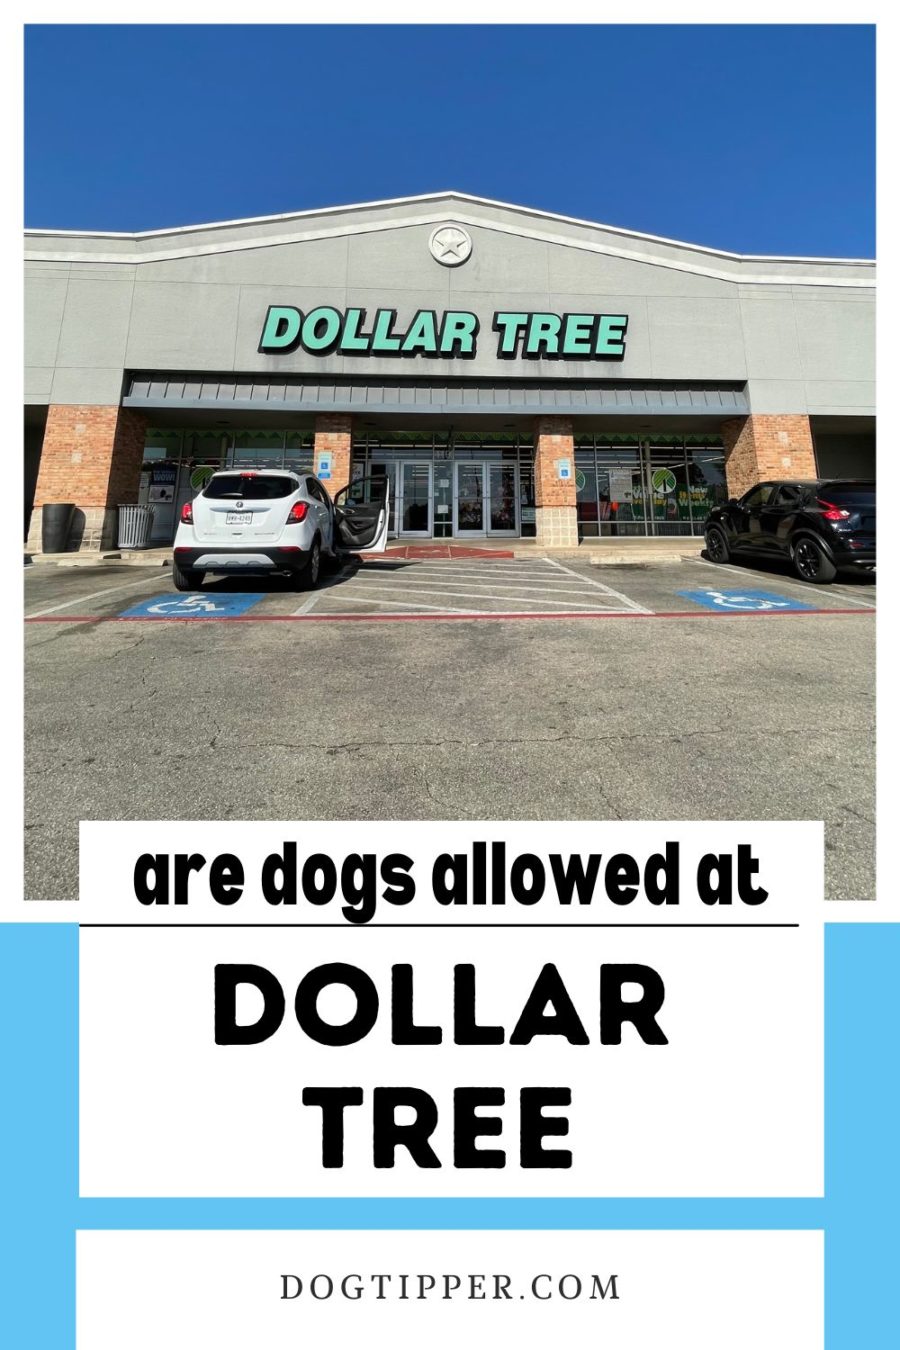 Does Dollar Tree allow dogs?